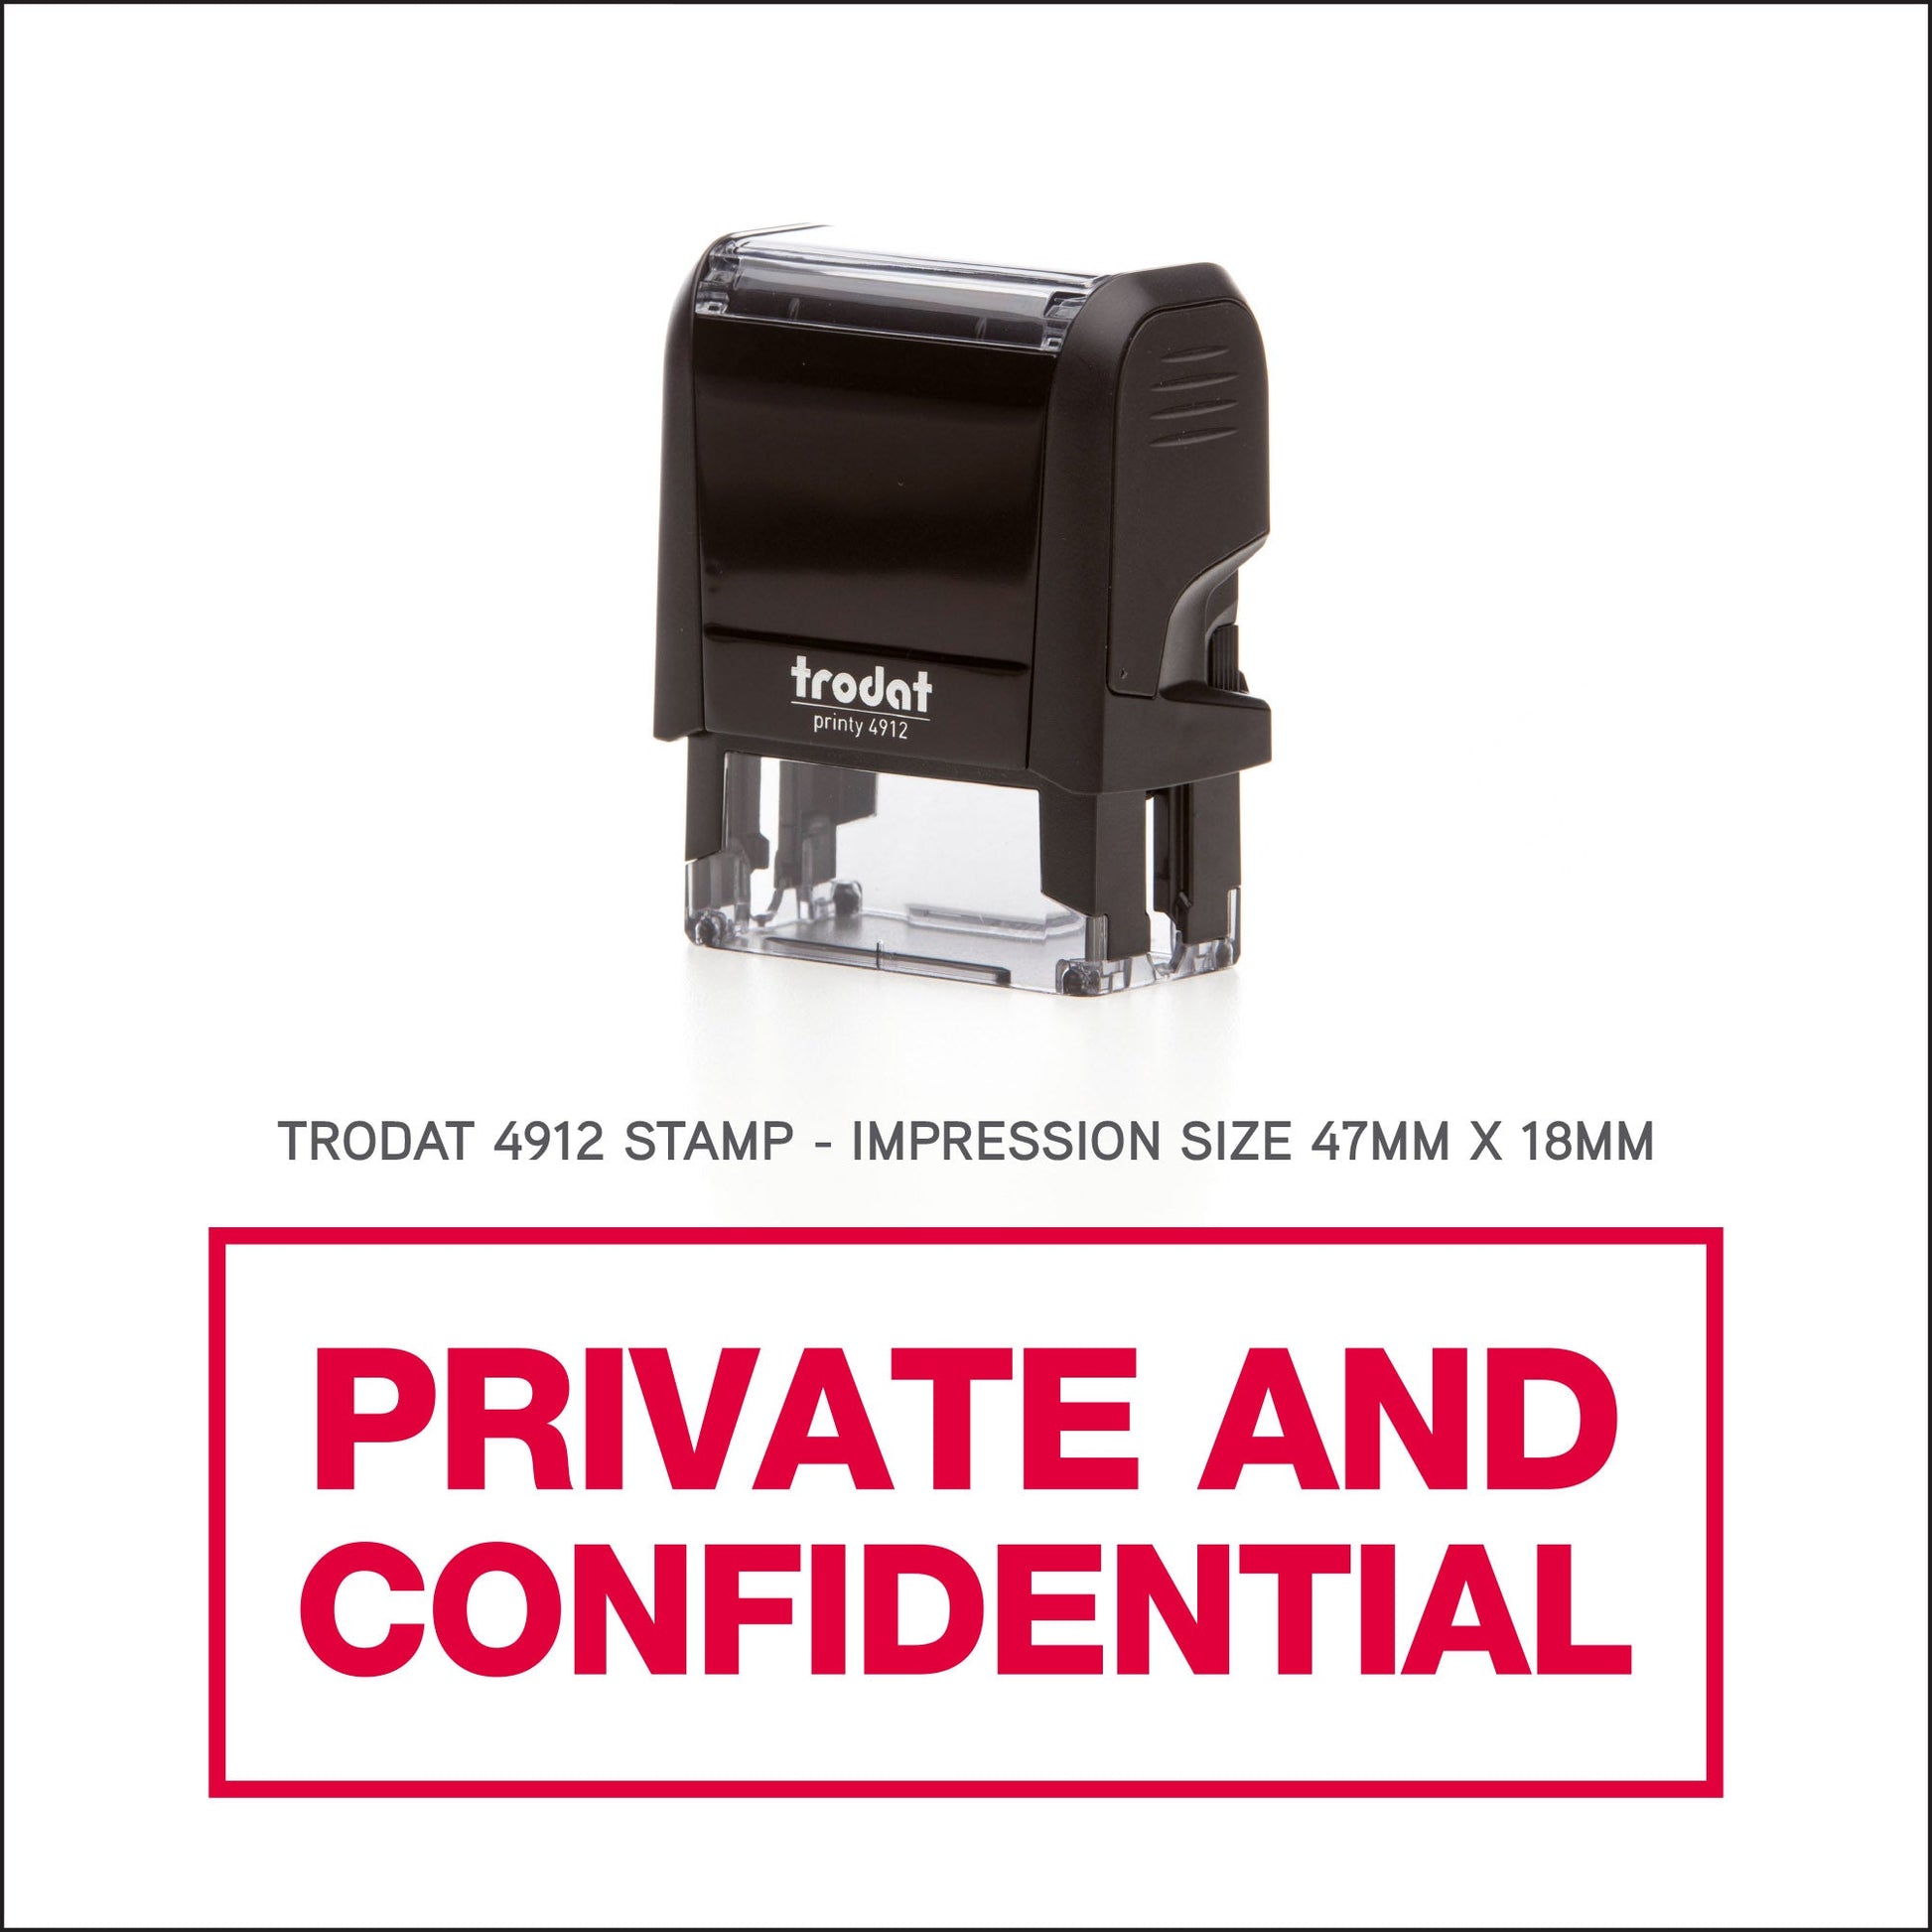 Private And Confidential Rubber Stamp - Trodat 4912 - 45mm x 18mm Impression